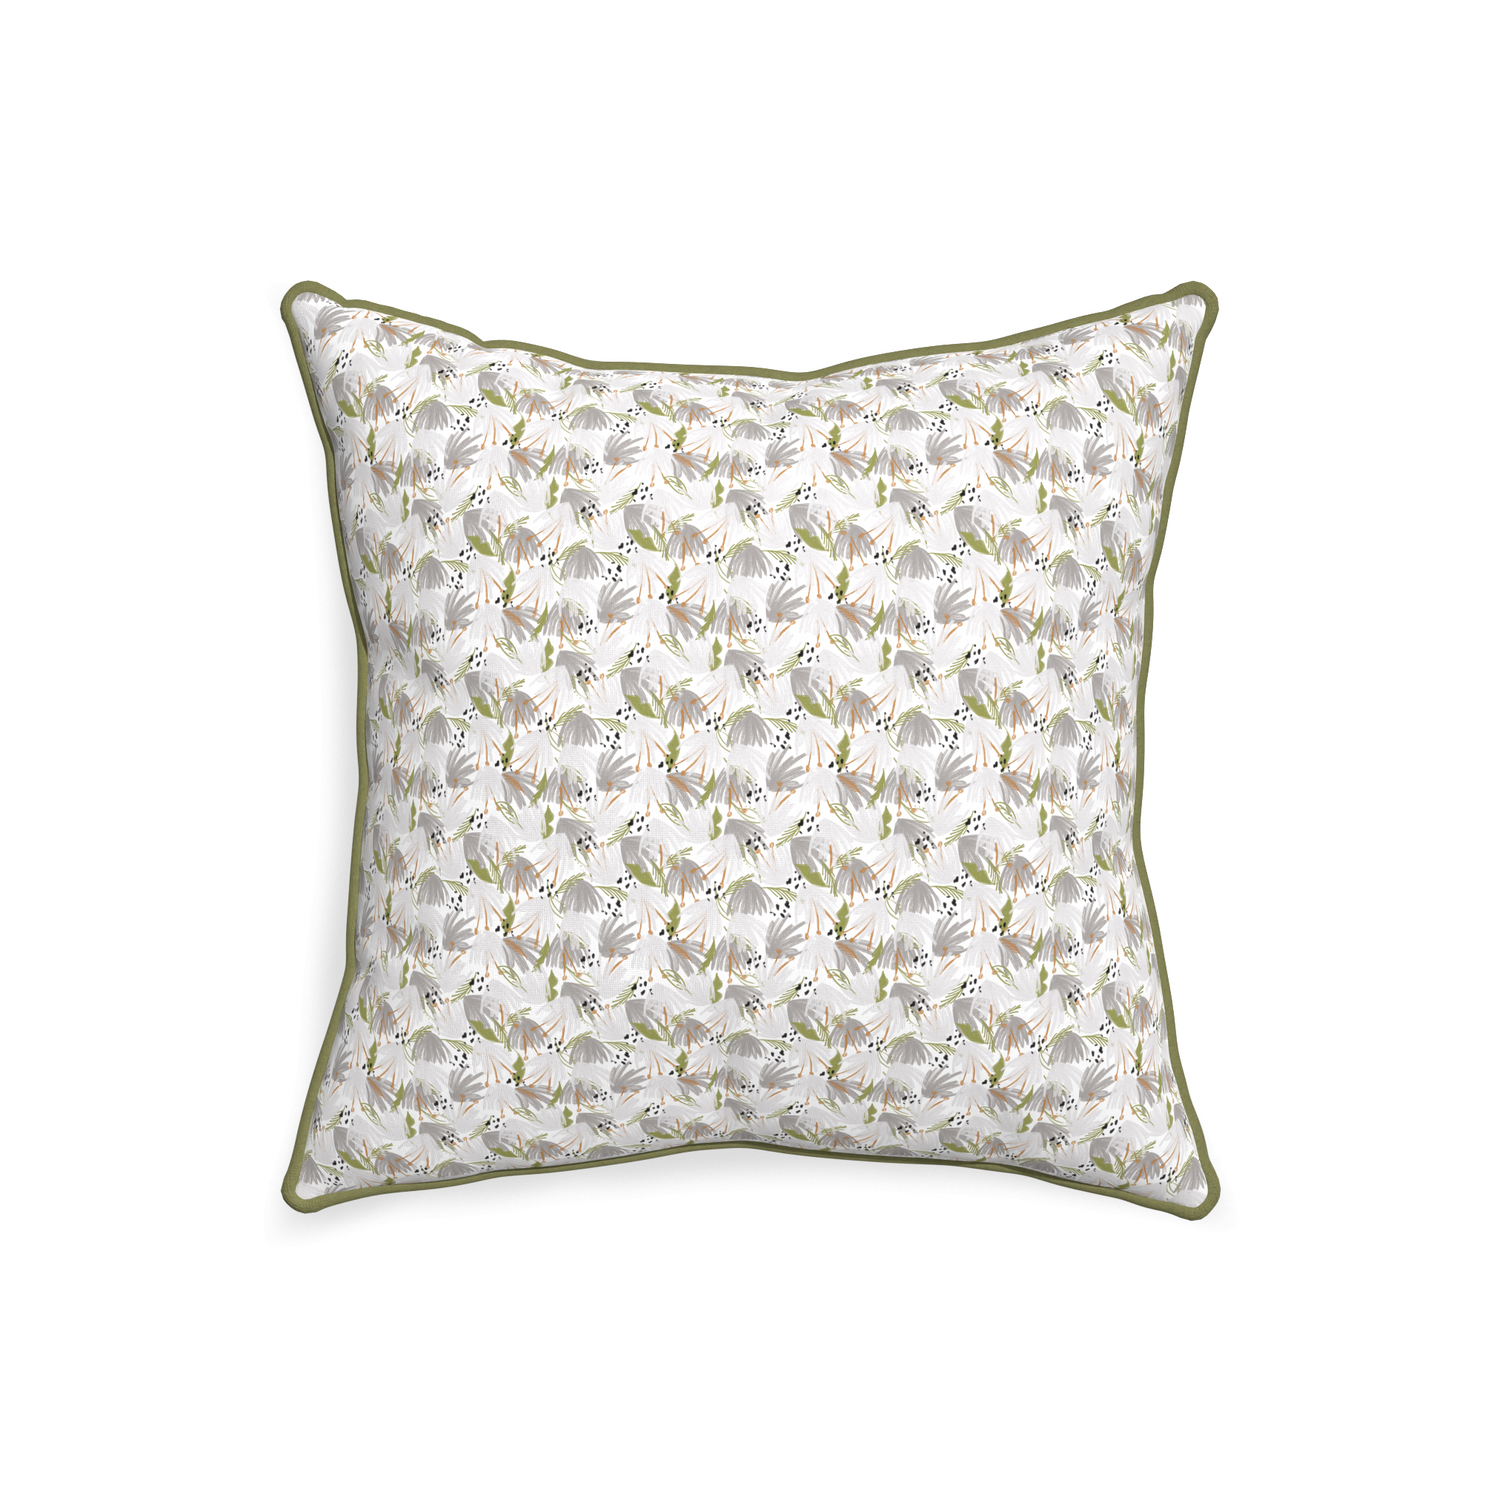 20-square eden grey custom pillow with moss piping on white background